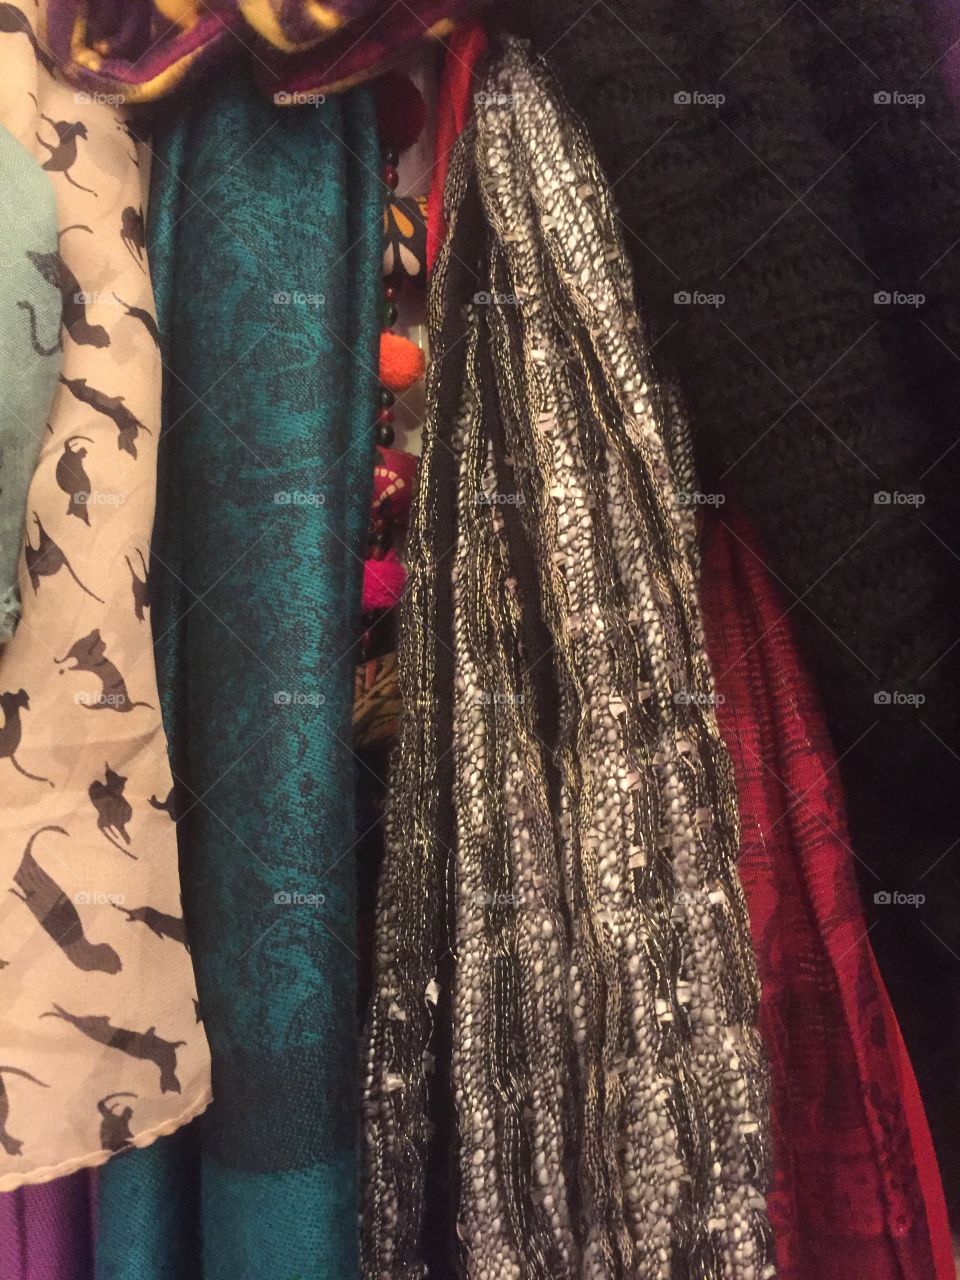 Multiple scarves, varying colors